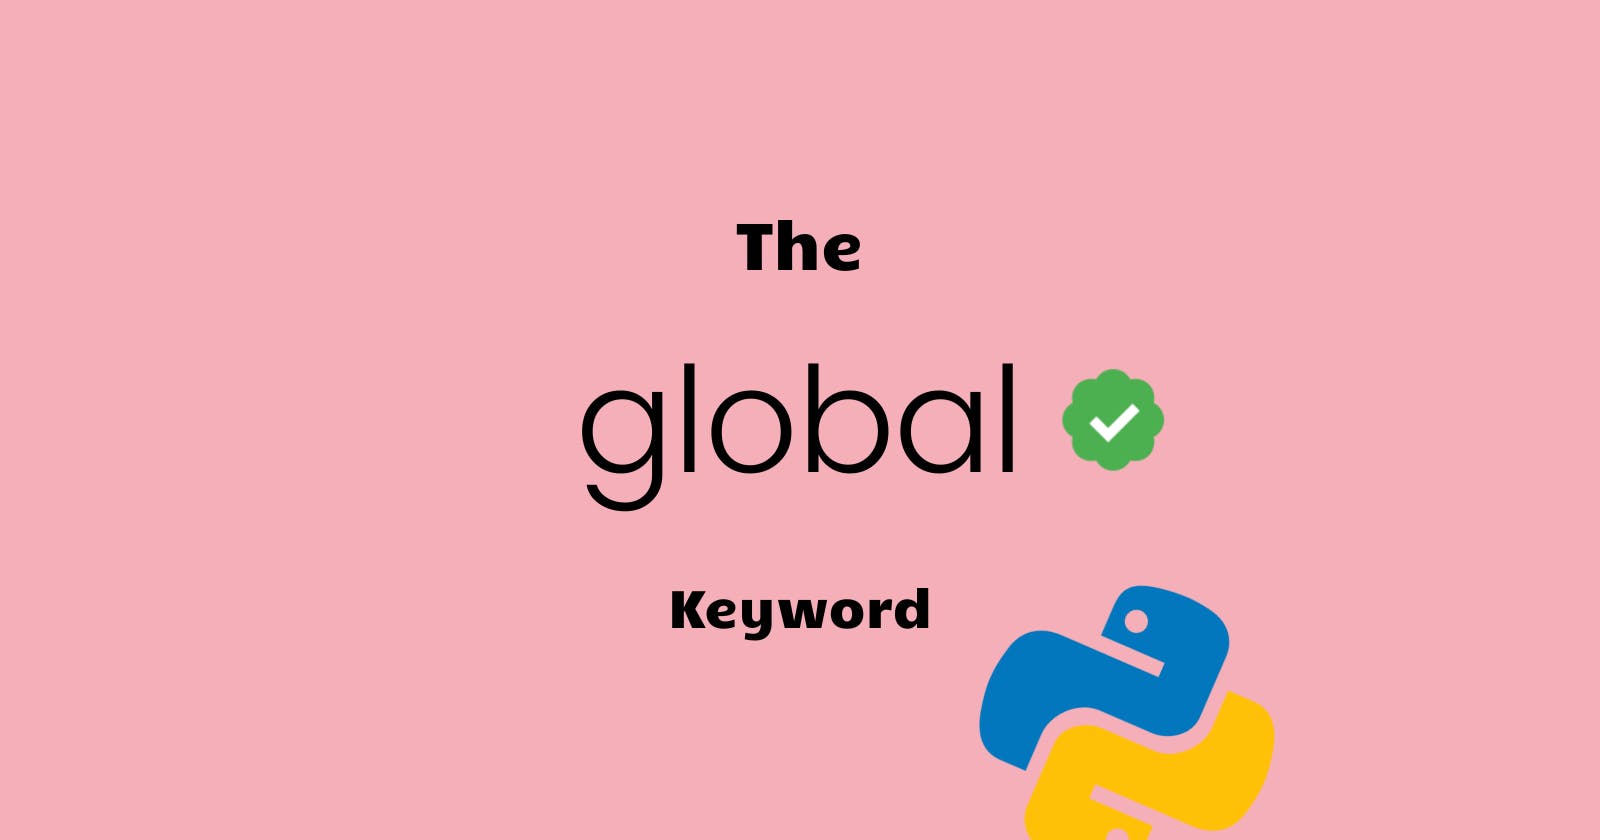 What is global Keyword in Python?